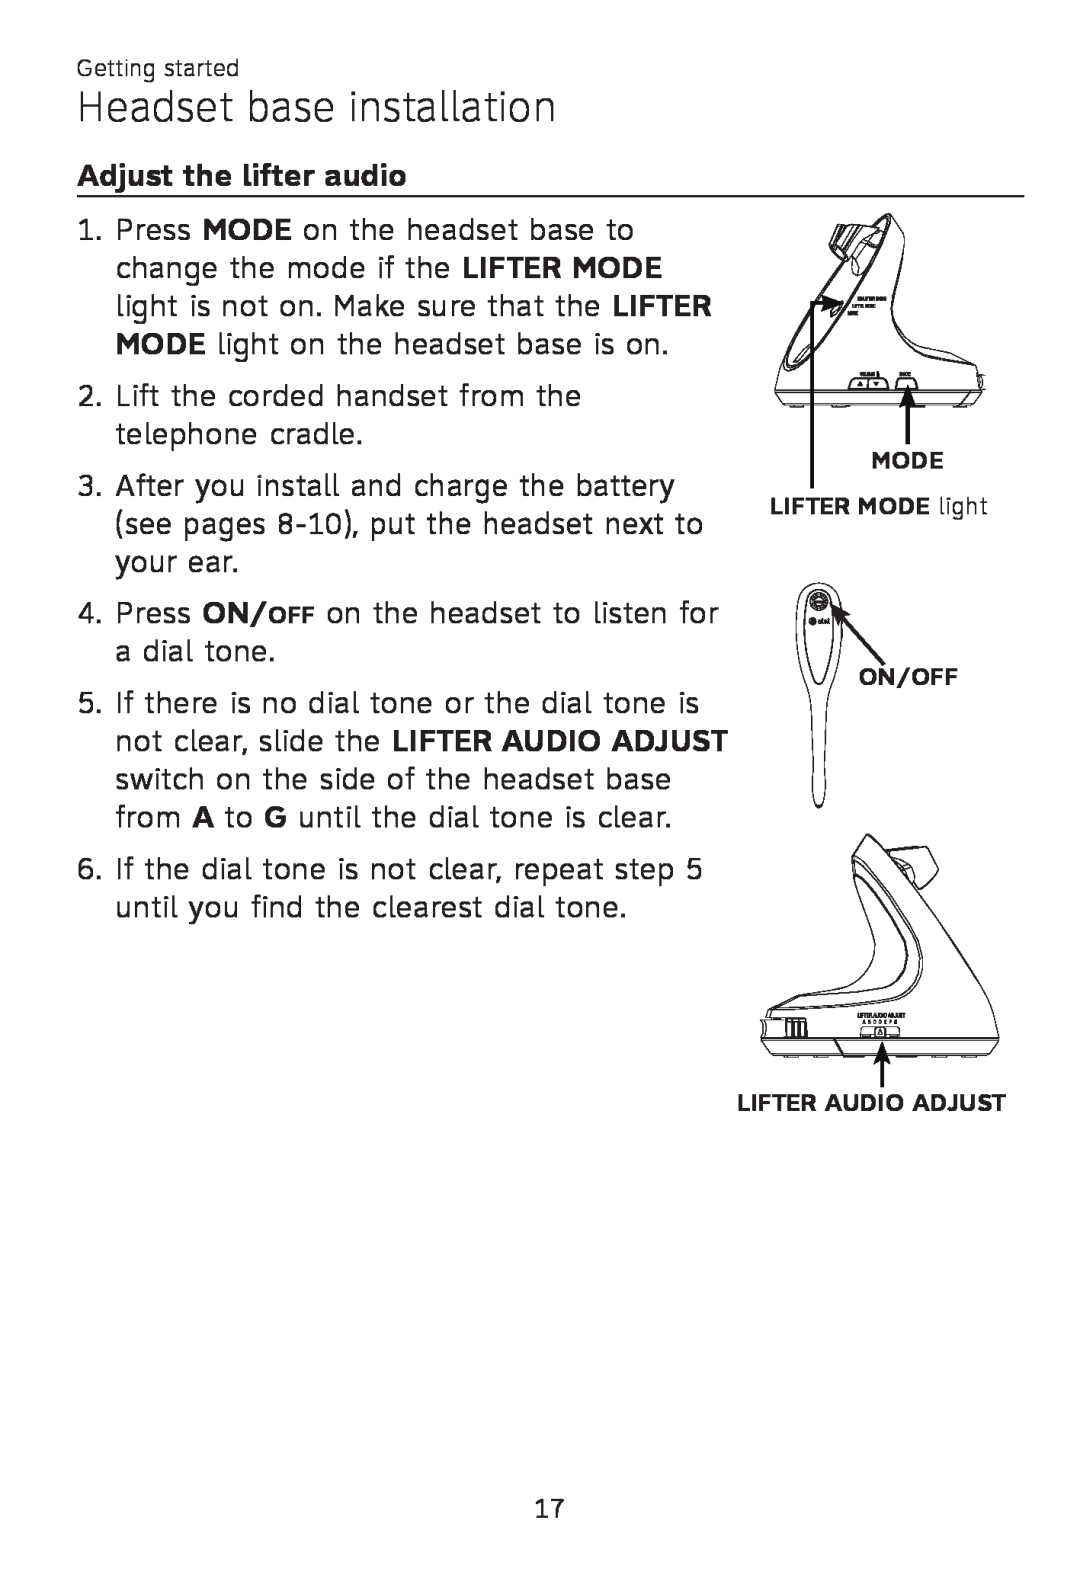 AT&T TL 7610 user manual Adjust the lifter audio, Headset base installation 